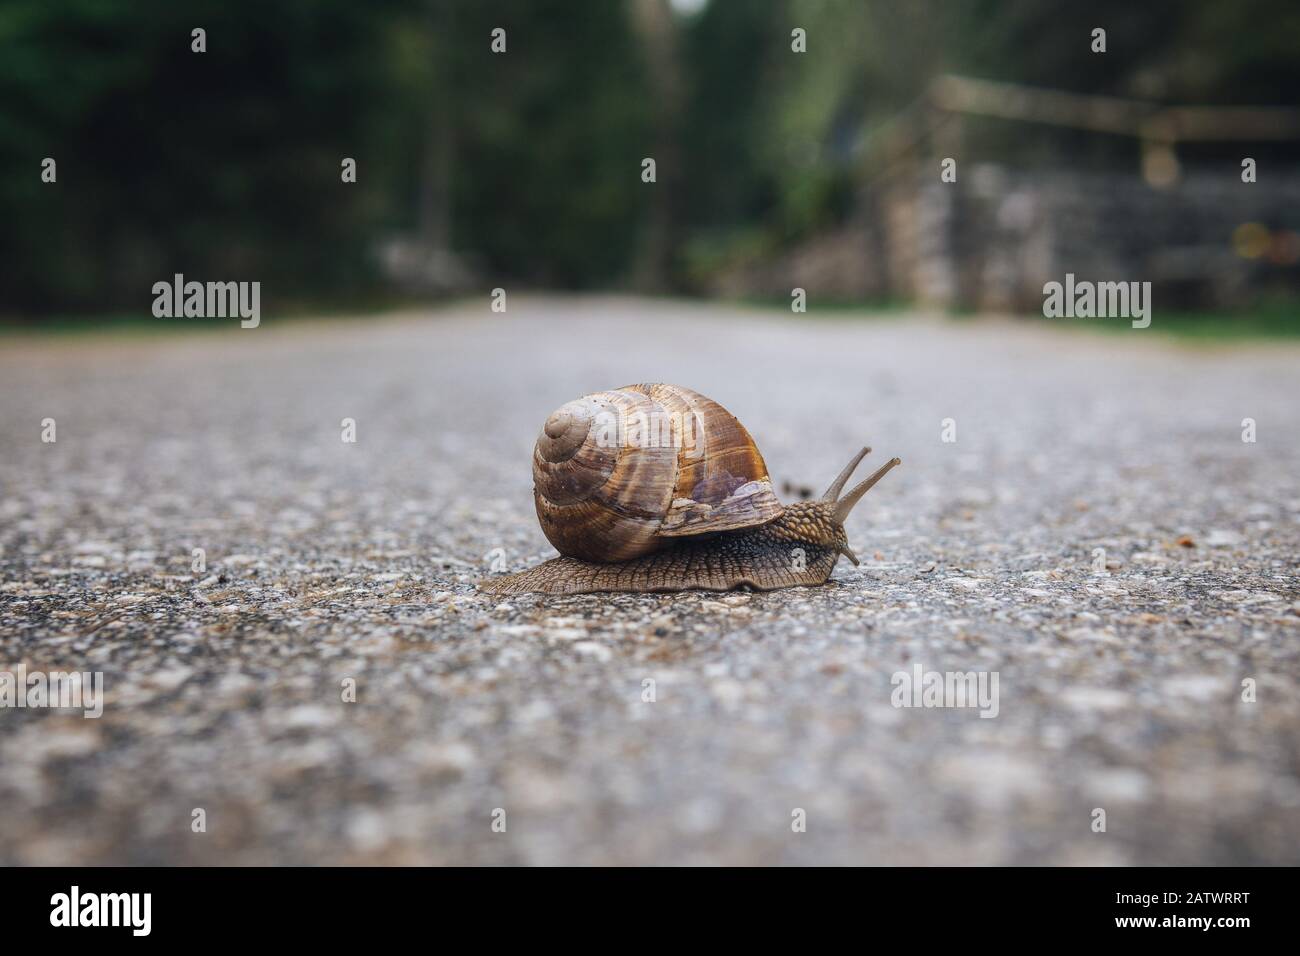 Little snail on the road Stock Photo